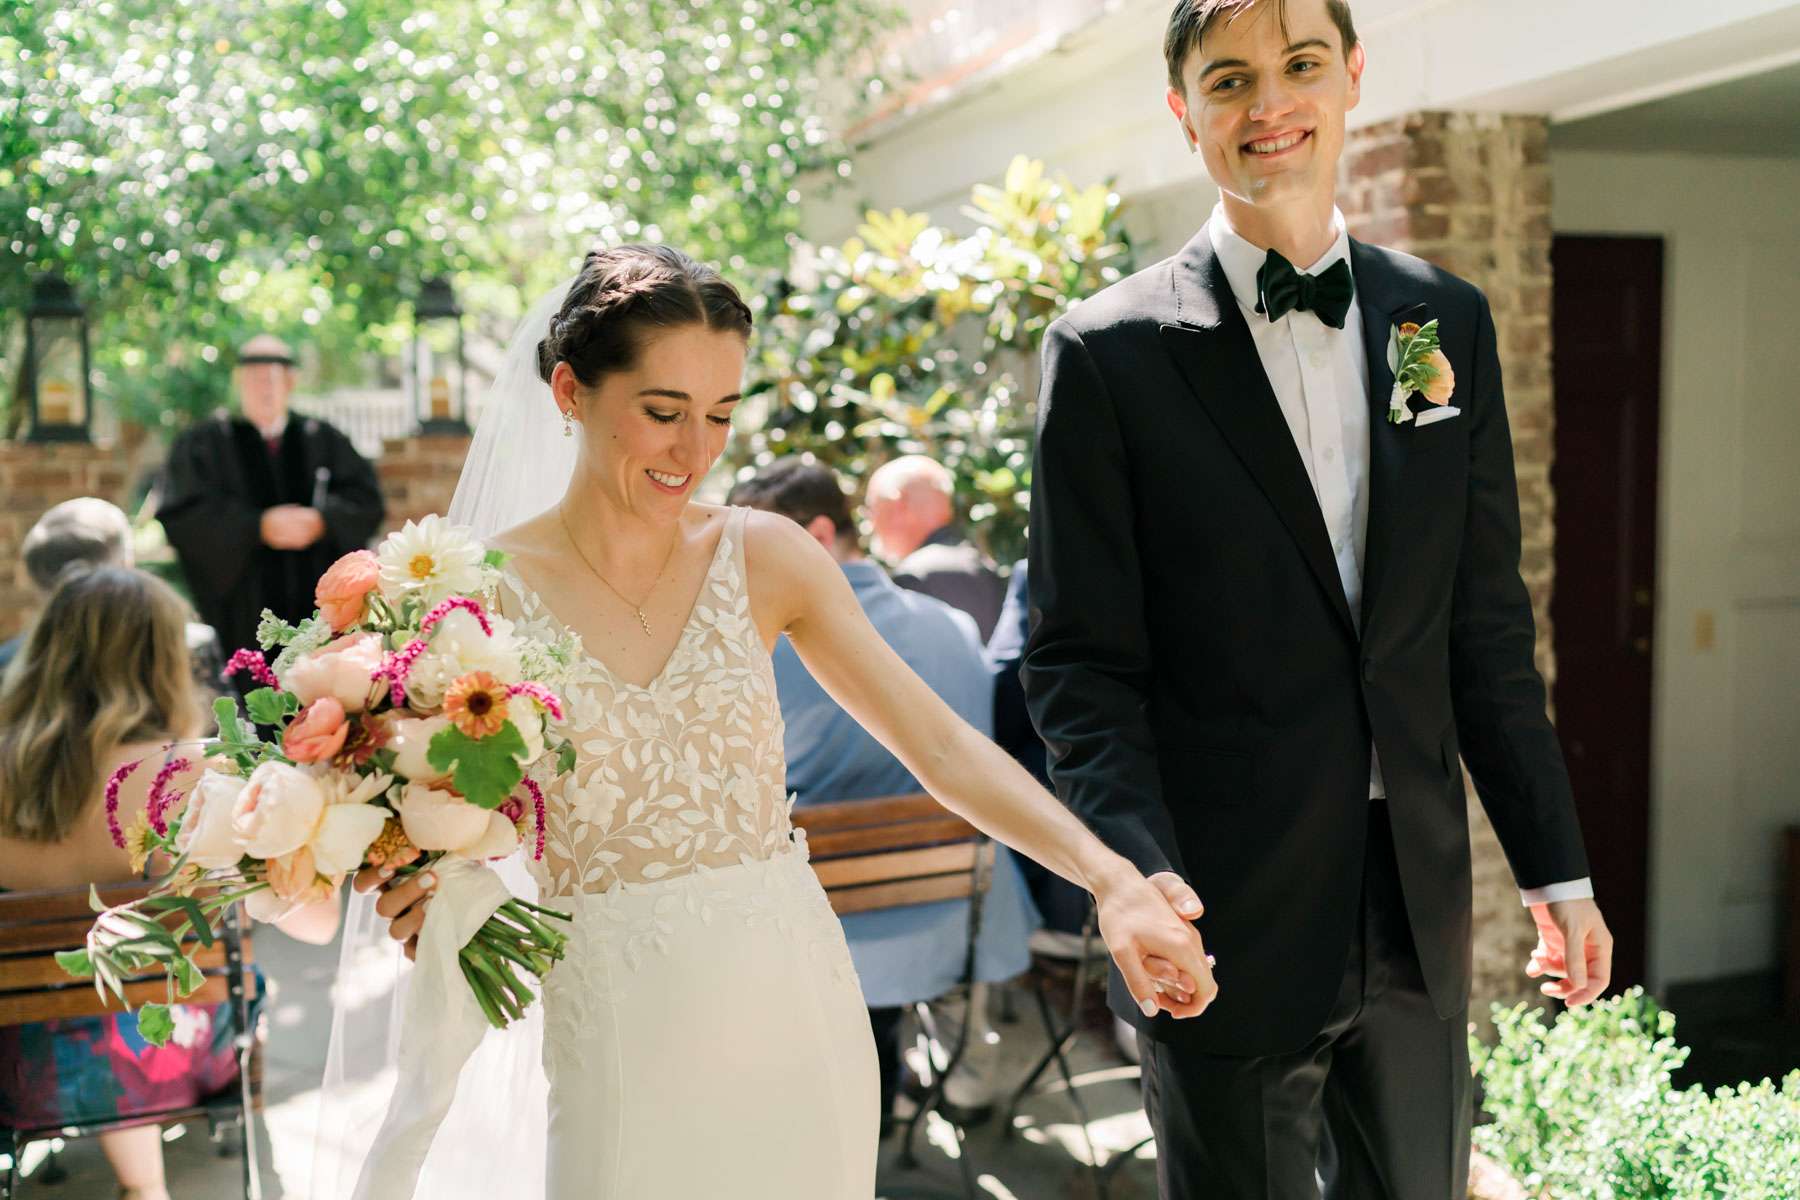 A bride and groom holding hands and smiling after they've walked down the aisle together